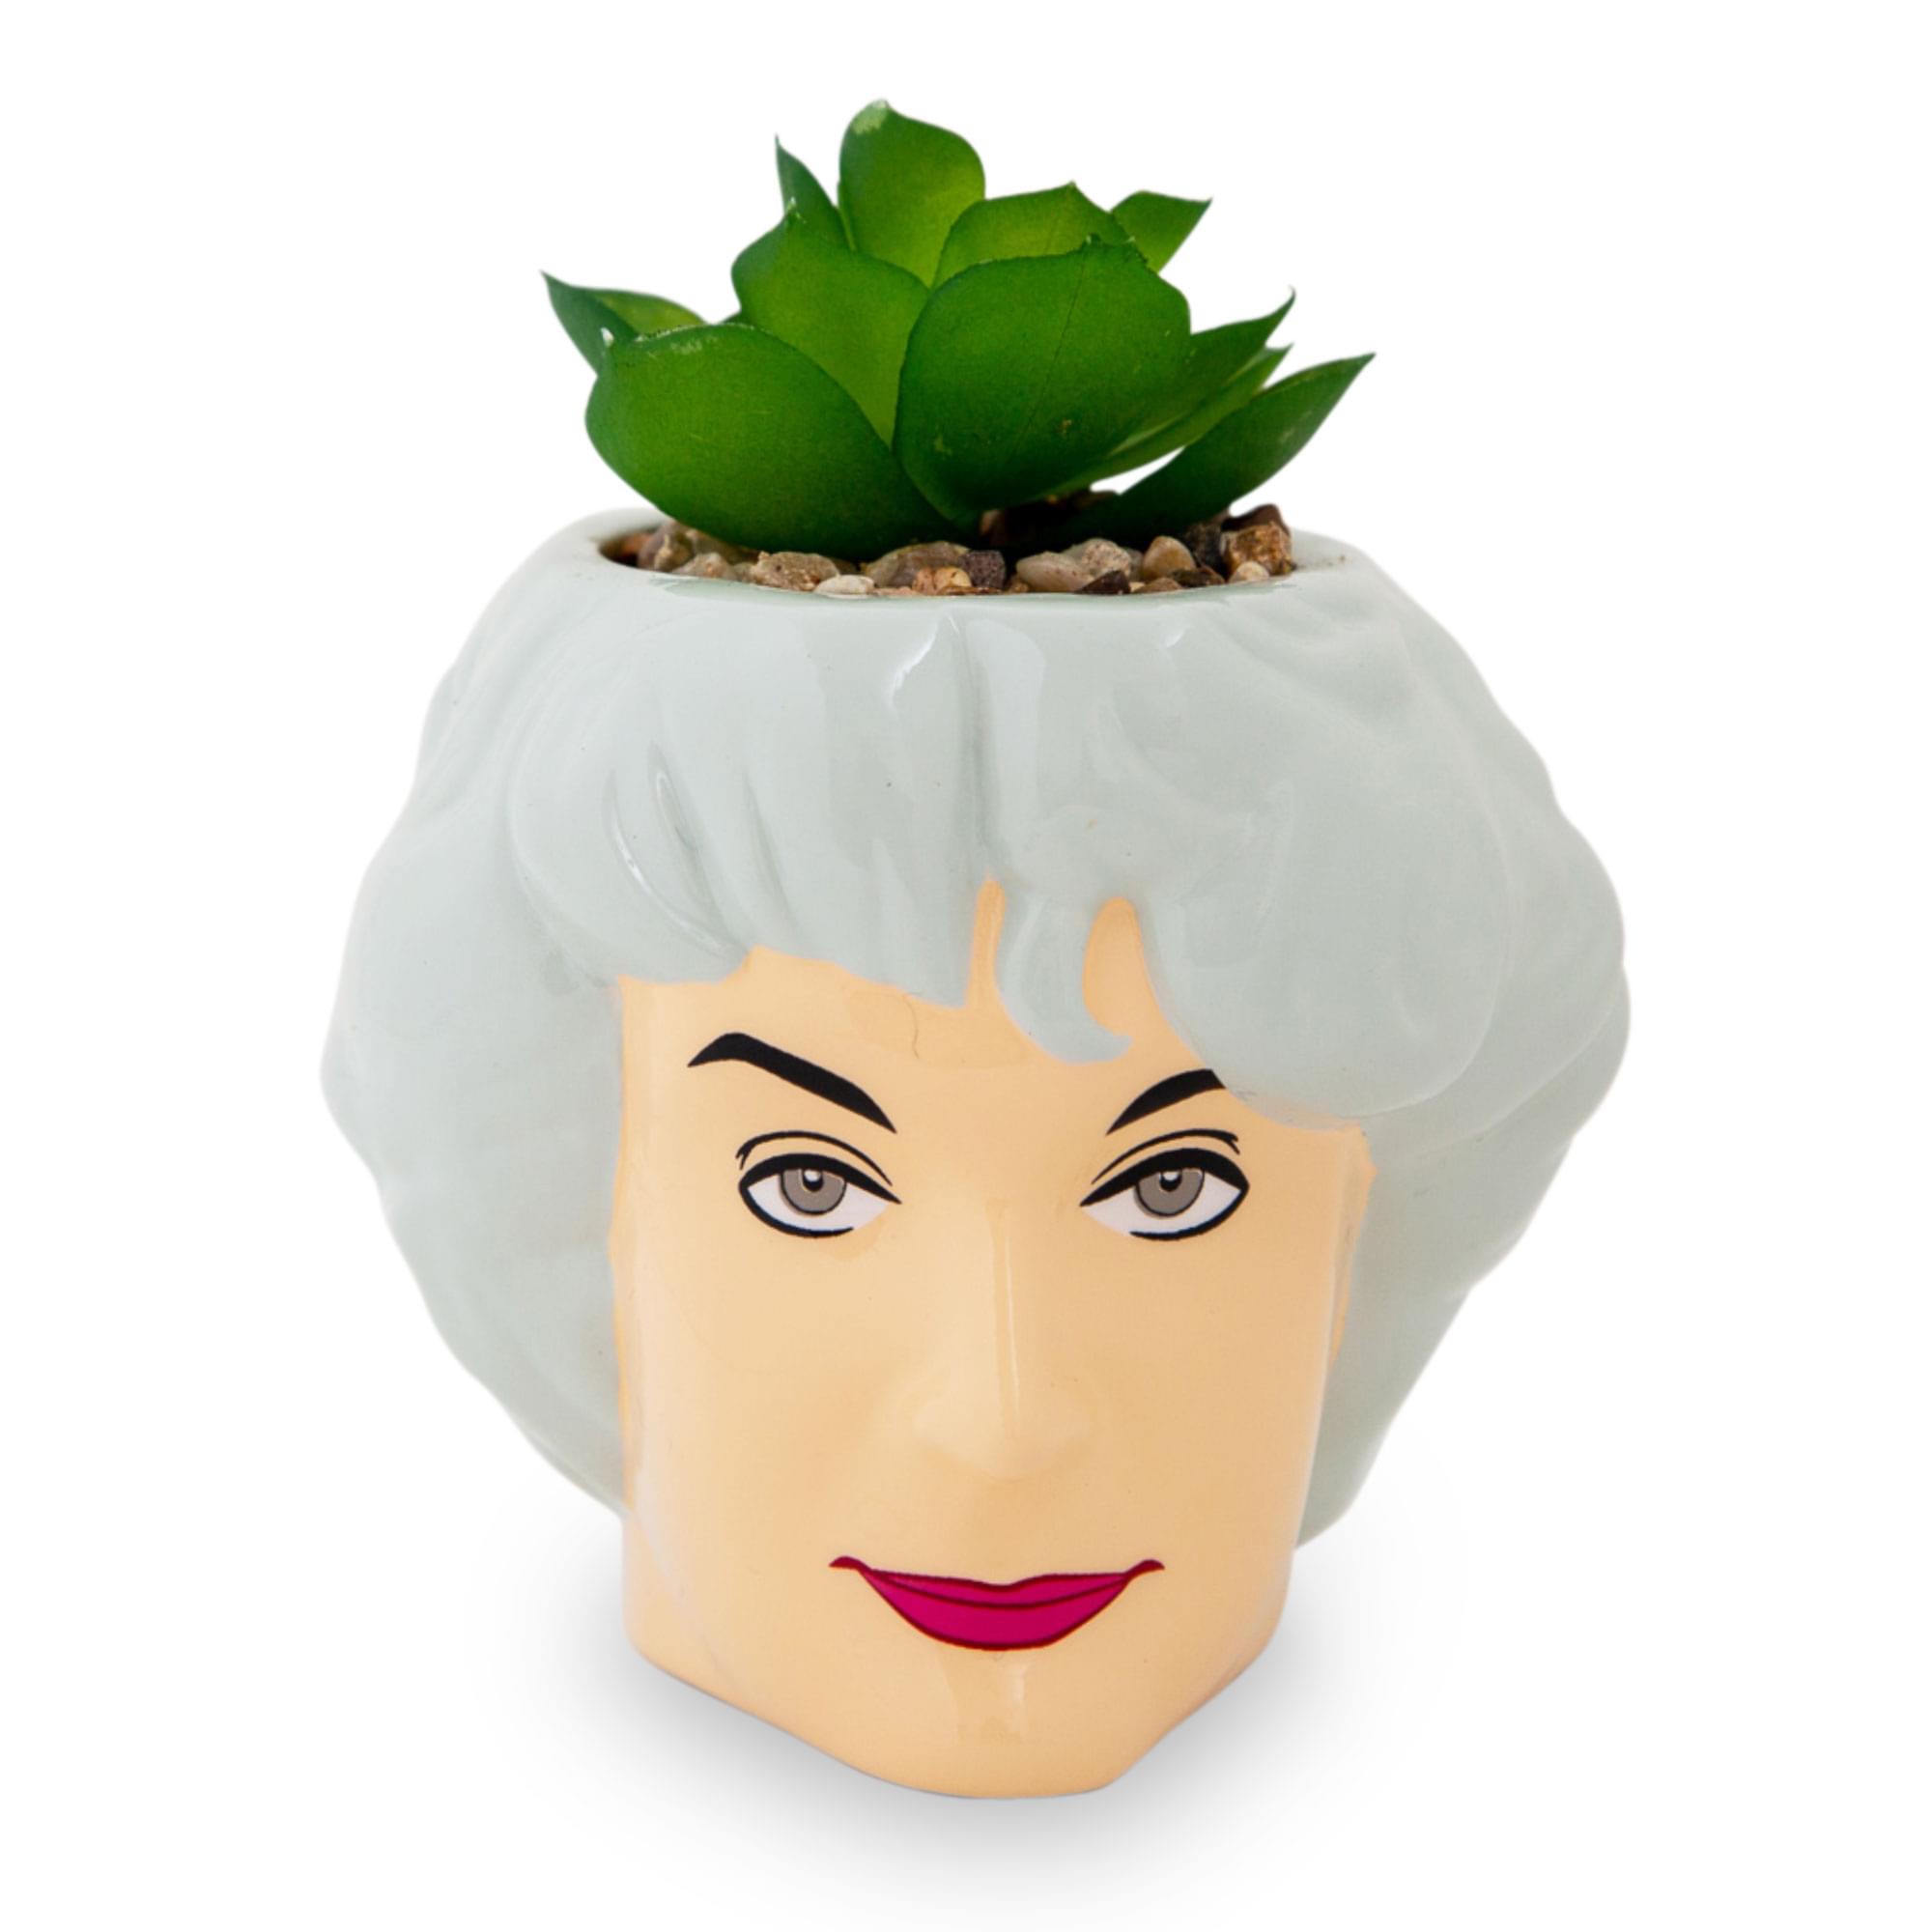 The Golden Girls Dorothy 3 Ceramic Mini Planter With Artificial Succulent